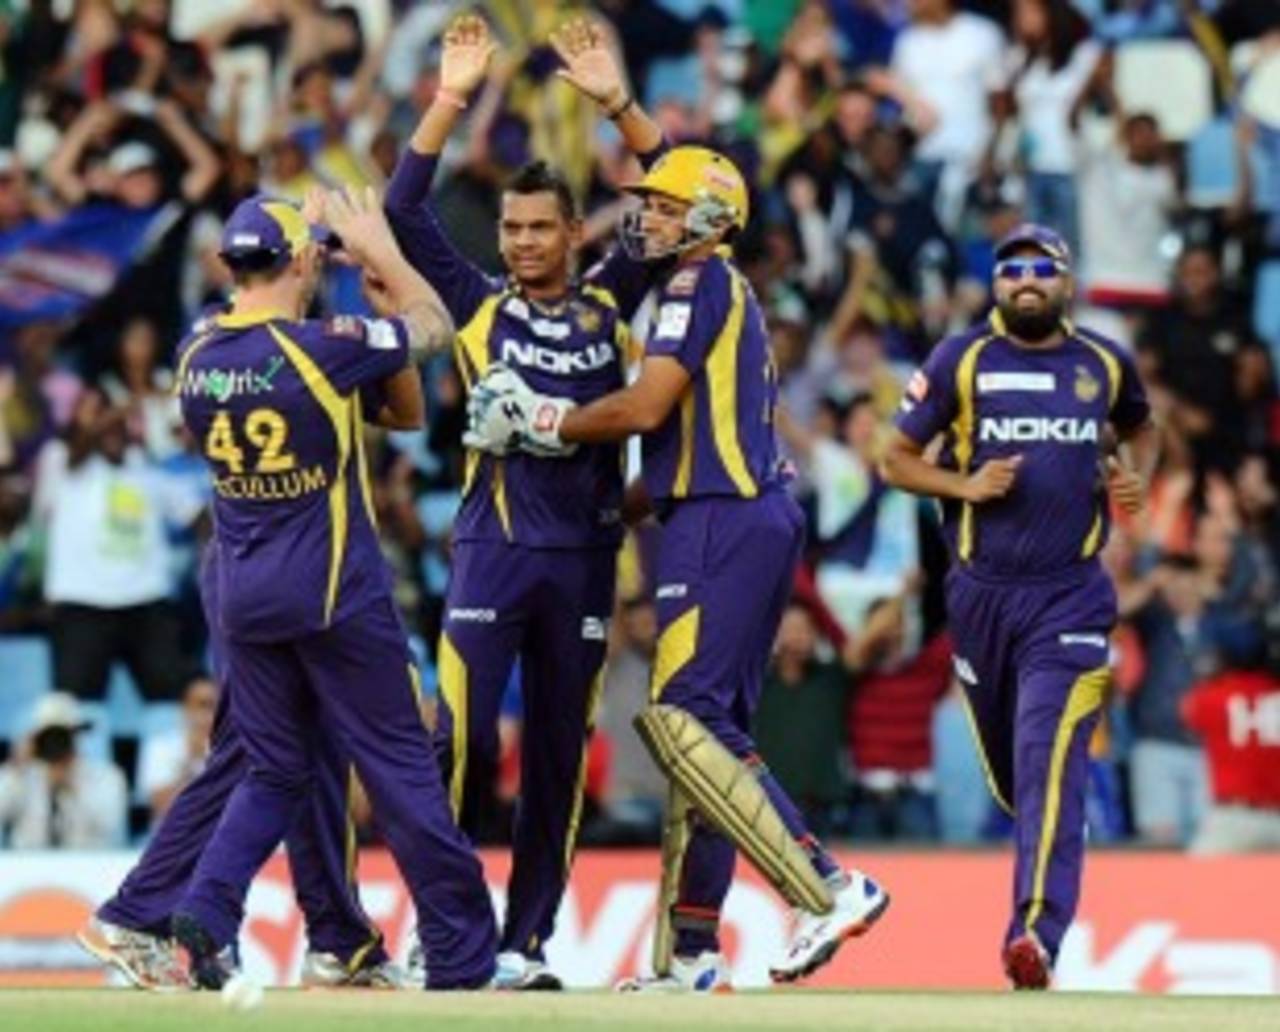 The batsmen are not the only ones Sunil Narine can confound - just ask Knight Riders' keeper&nbsp;&nbsp;&bull;&nbsp;&nbsp;AFP